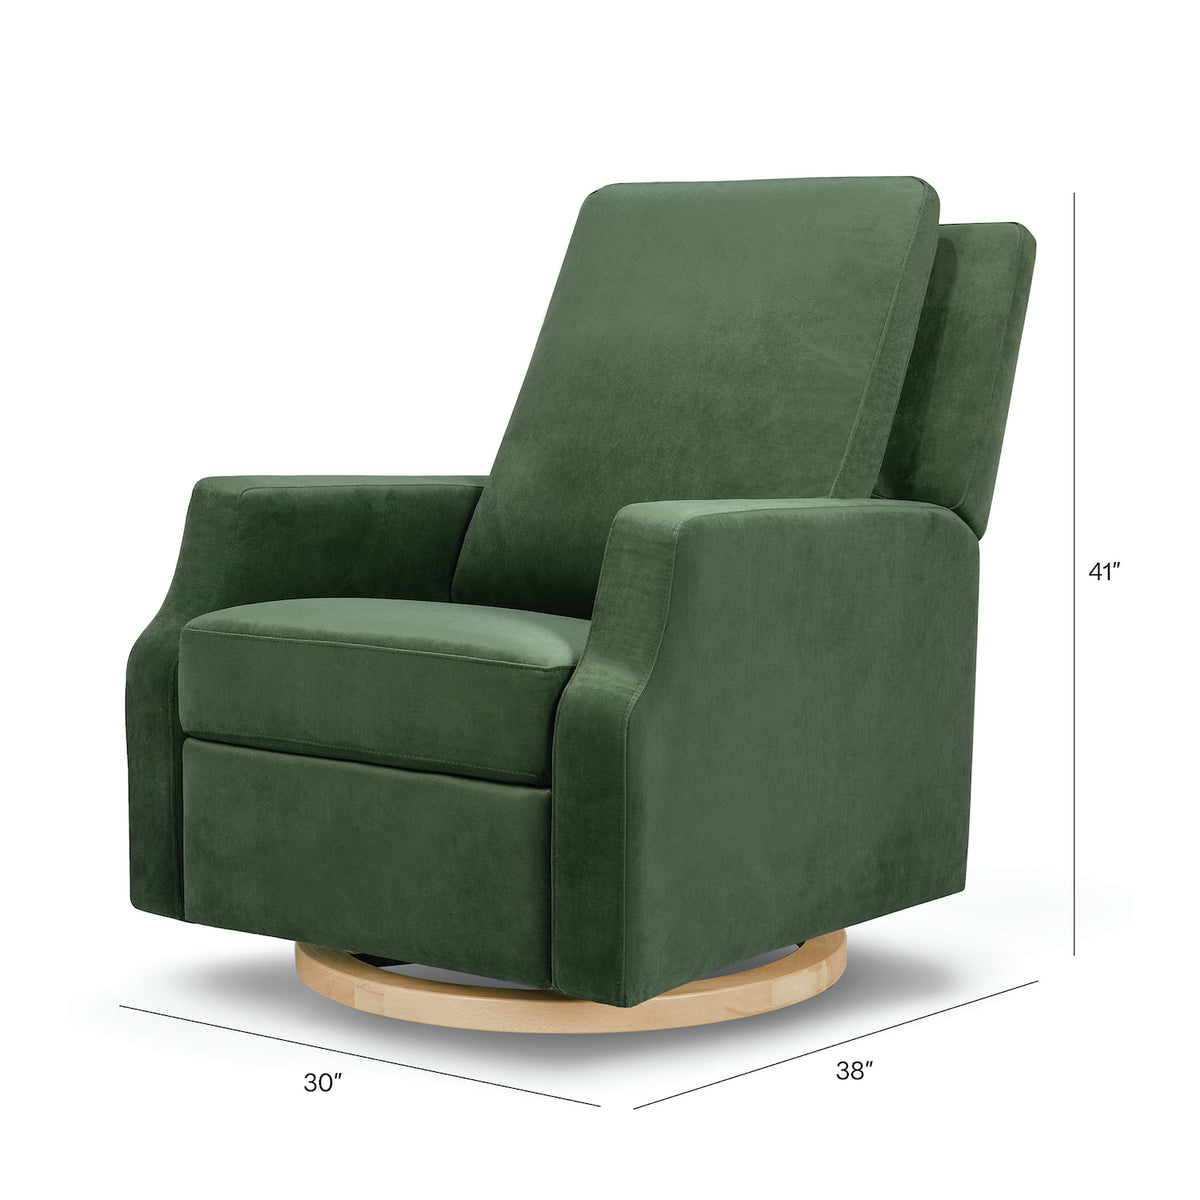 Crewe Recliner + Swivel Glider in Eco-Performance Fabric - Forest Green Velvet with Light Wood Base